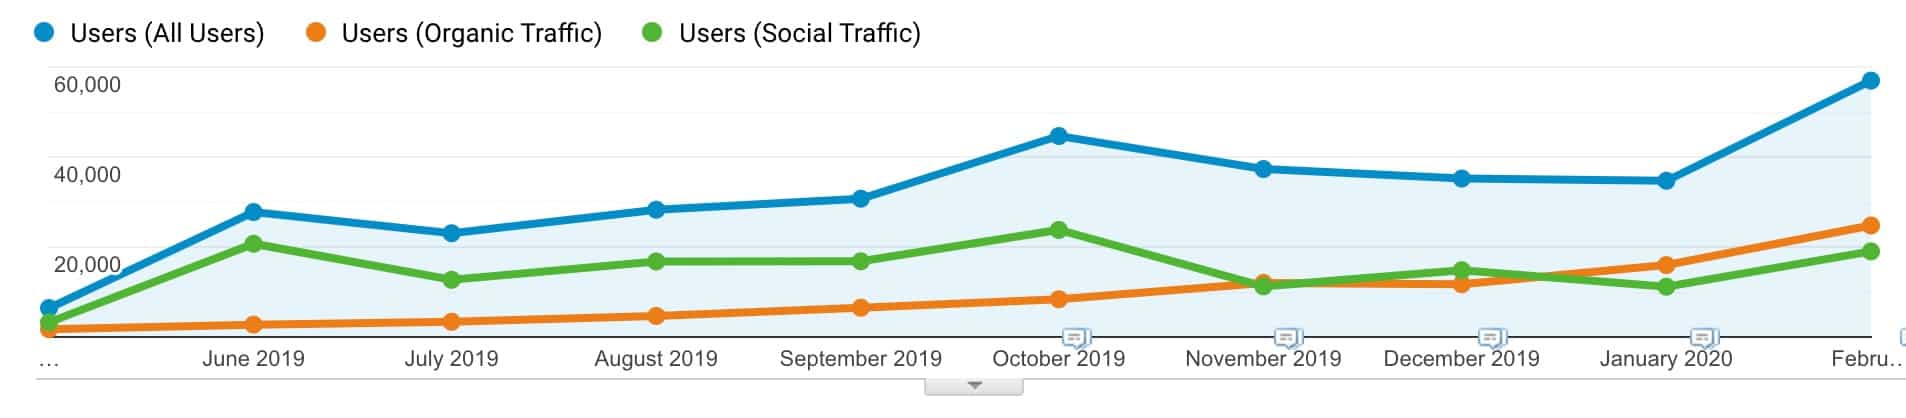 Social traffic enables quick wins while organic traffic ramps up